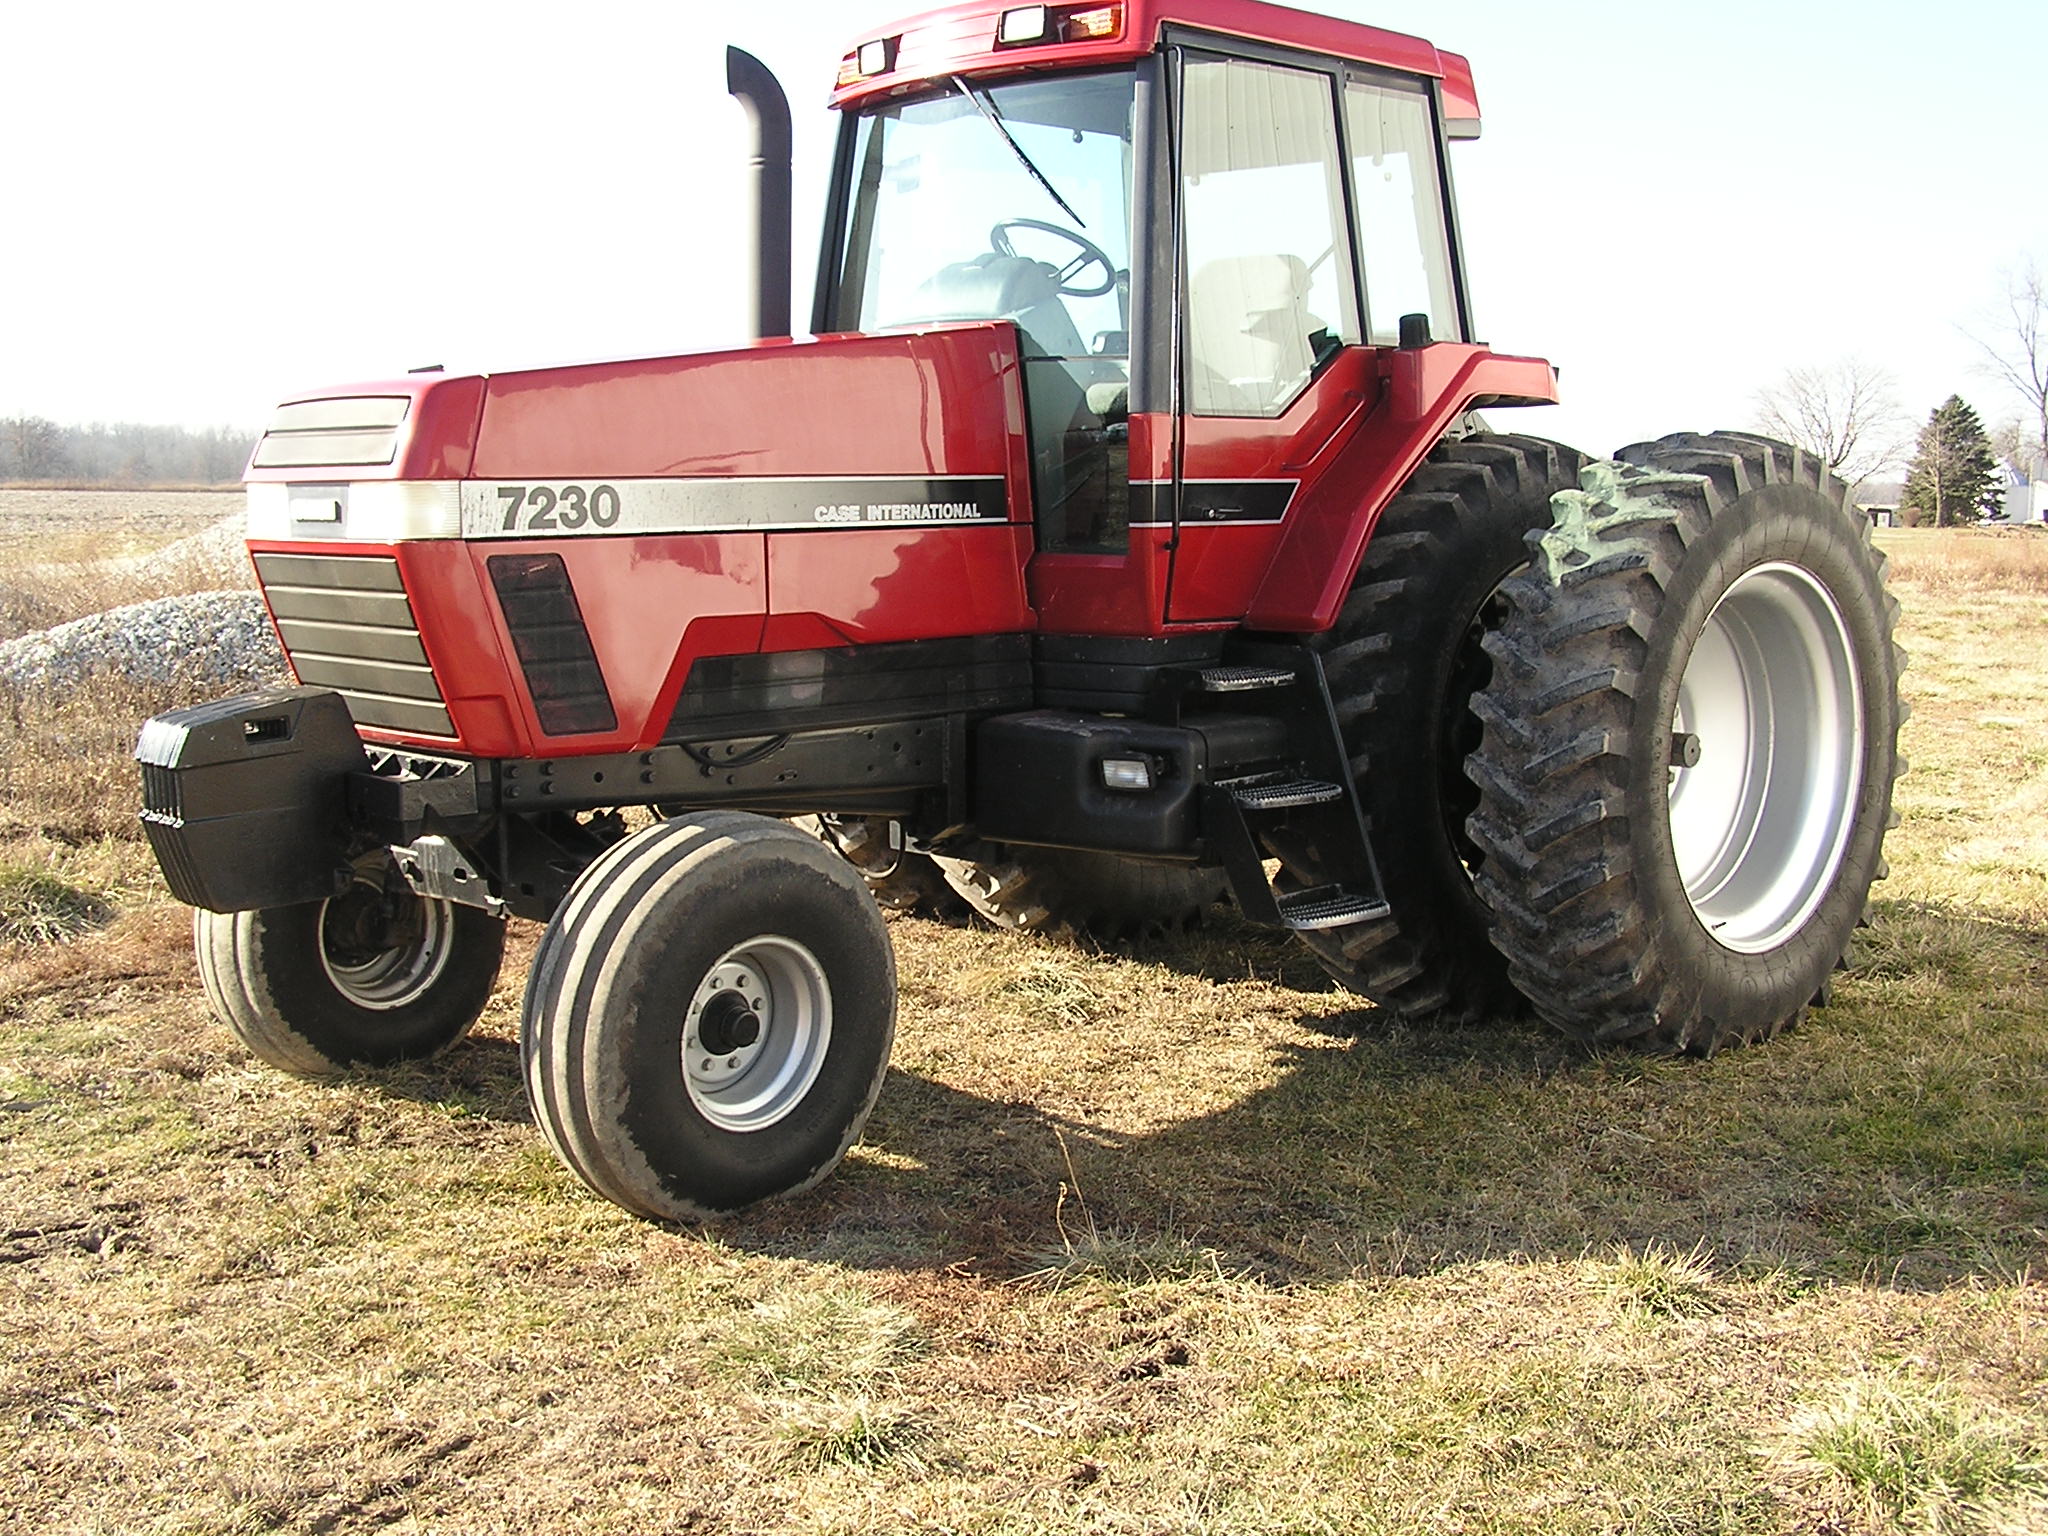 1995 CaseIH 7230 - 2WD, 480/80R46 Rear Duals, 5250 Hrs, Very Nice!! $ ...